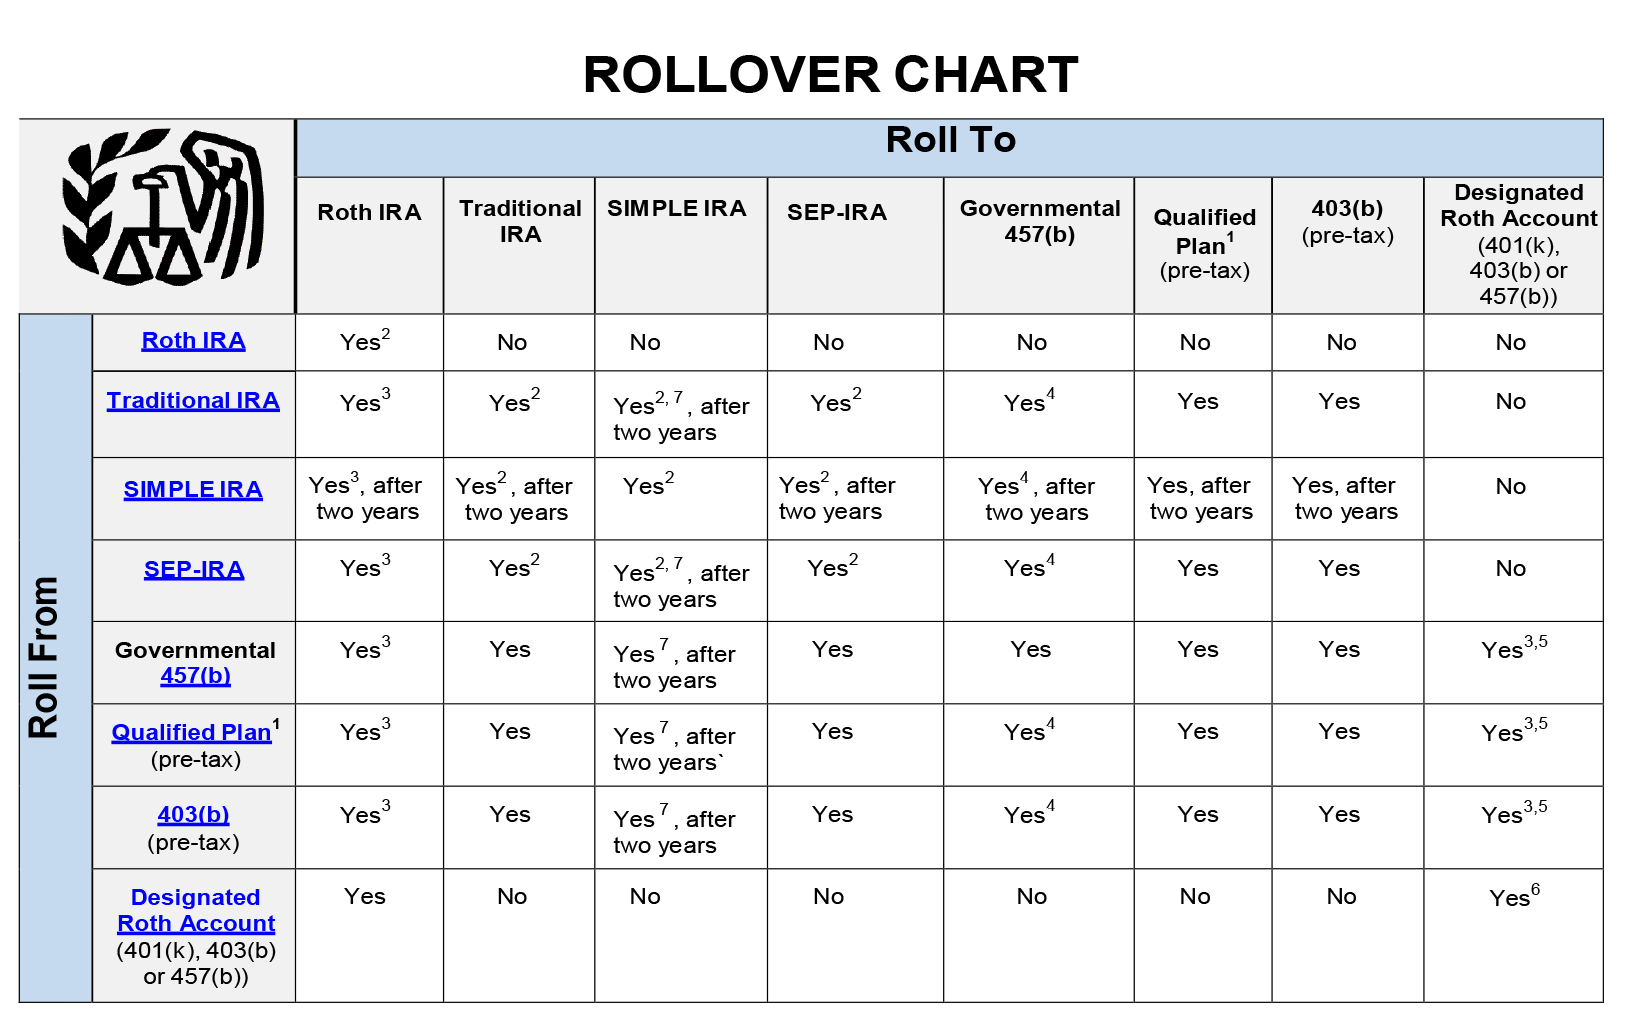 Rollover Ira: How To Rollover Your 401(k) - An Overview